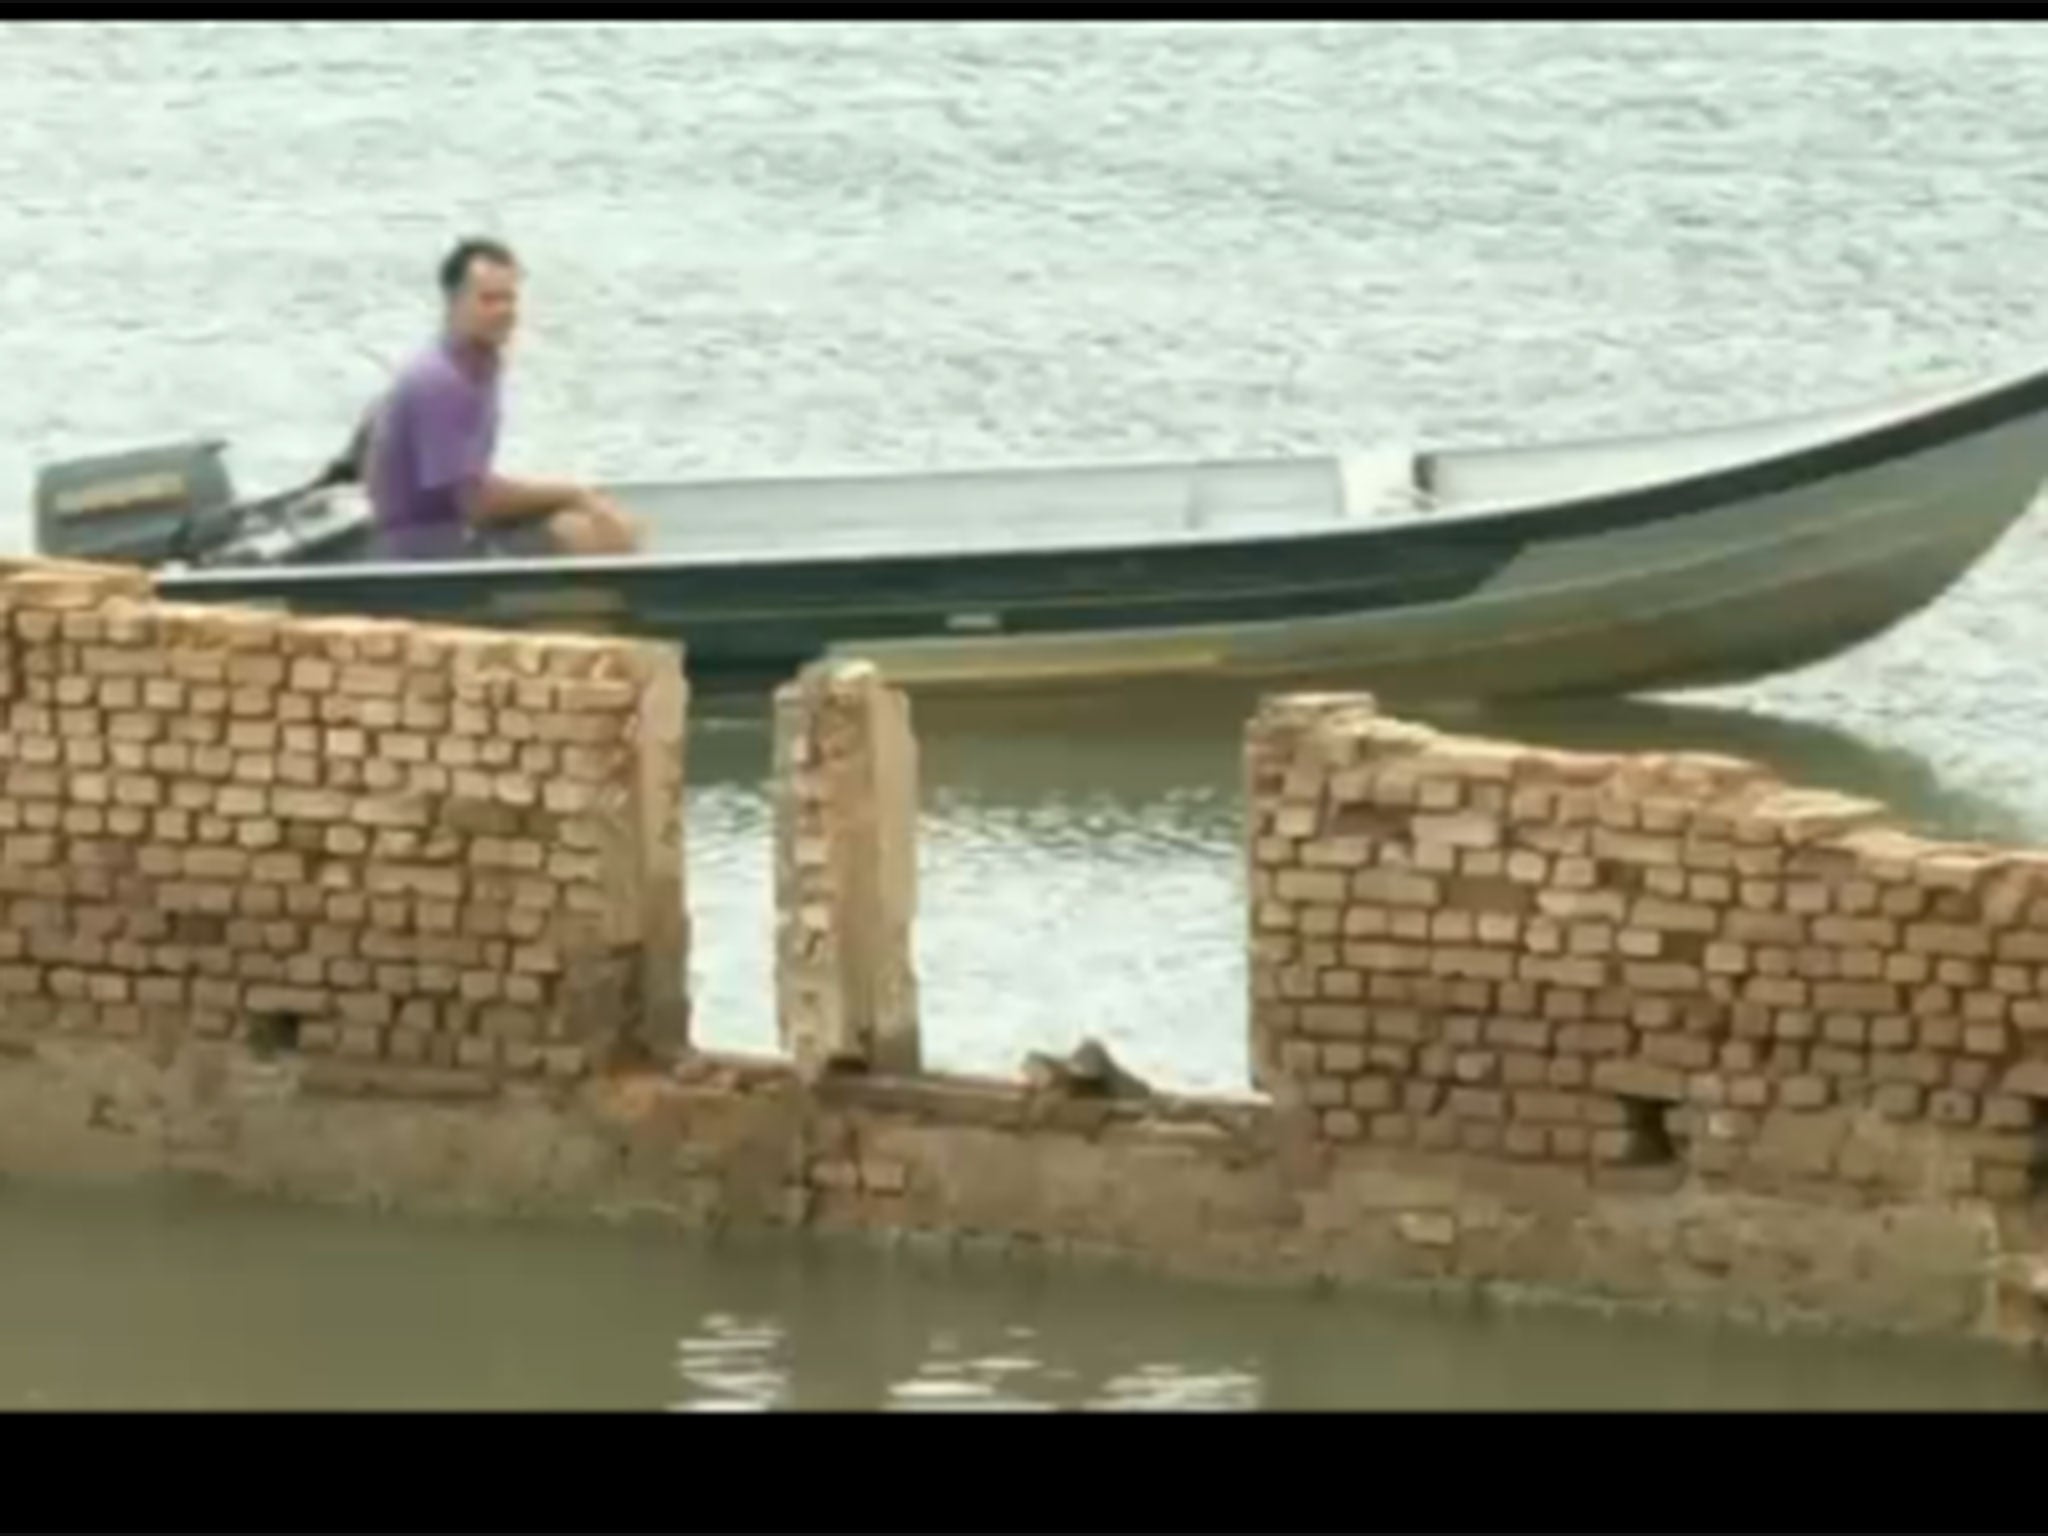 The town was rediscovered after water levels dropped in the Sao Paulo